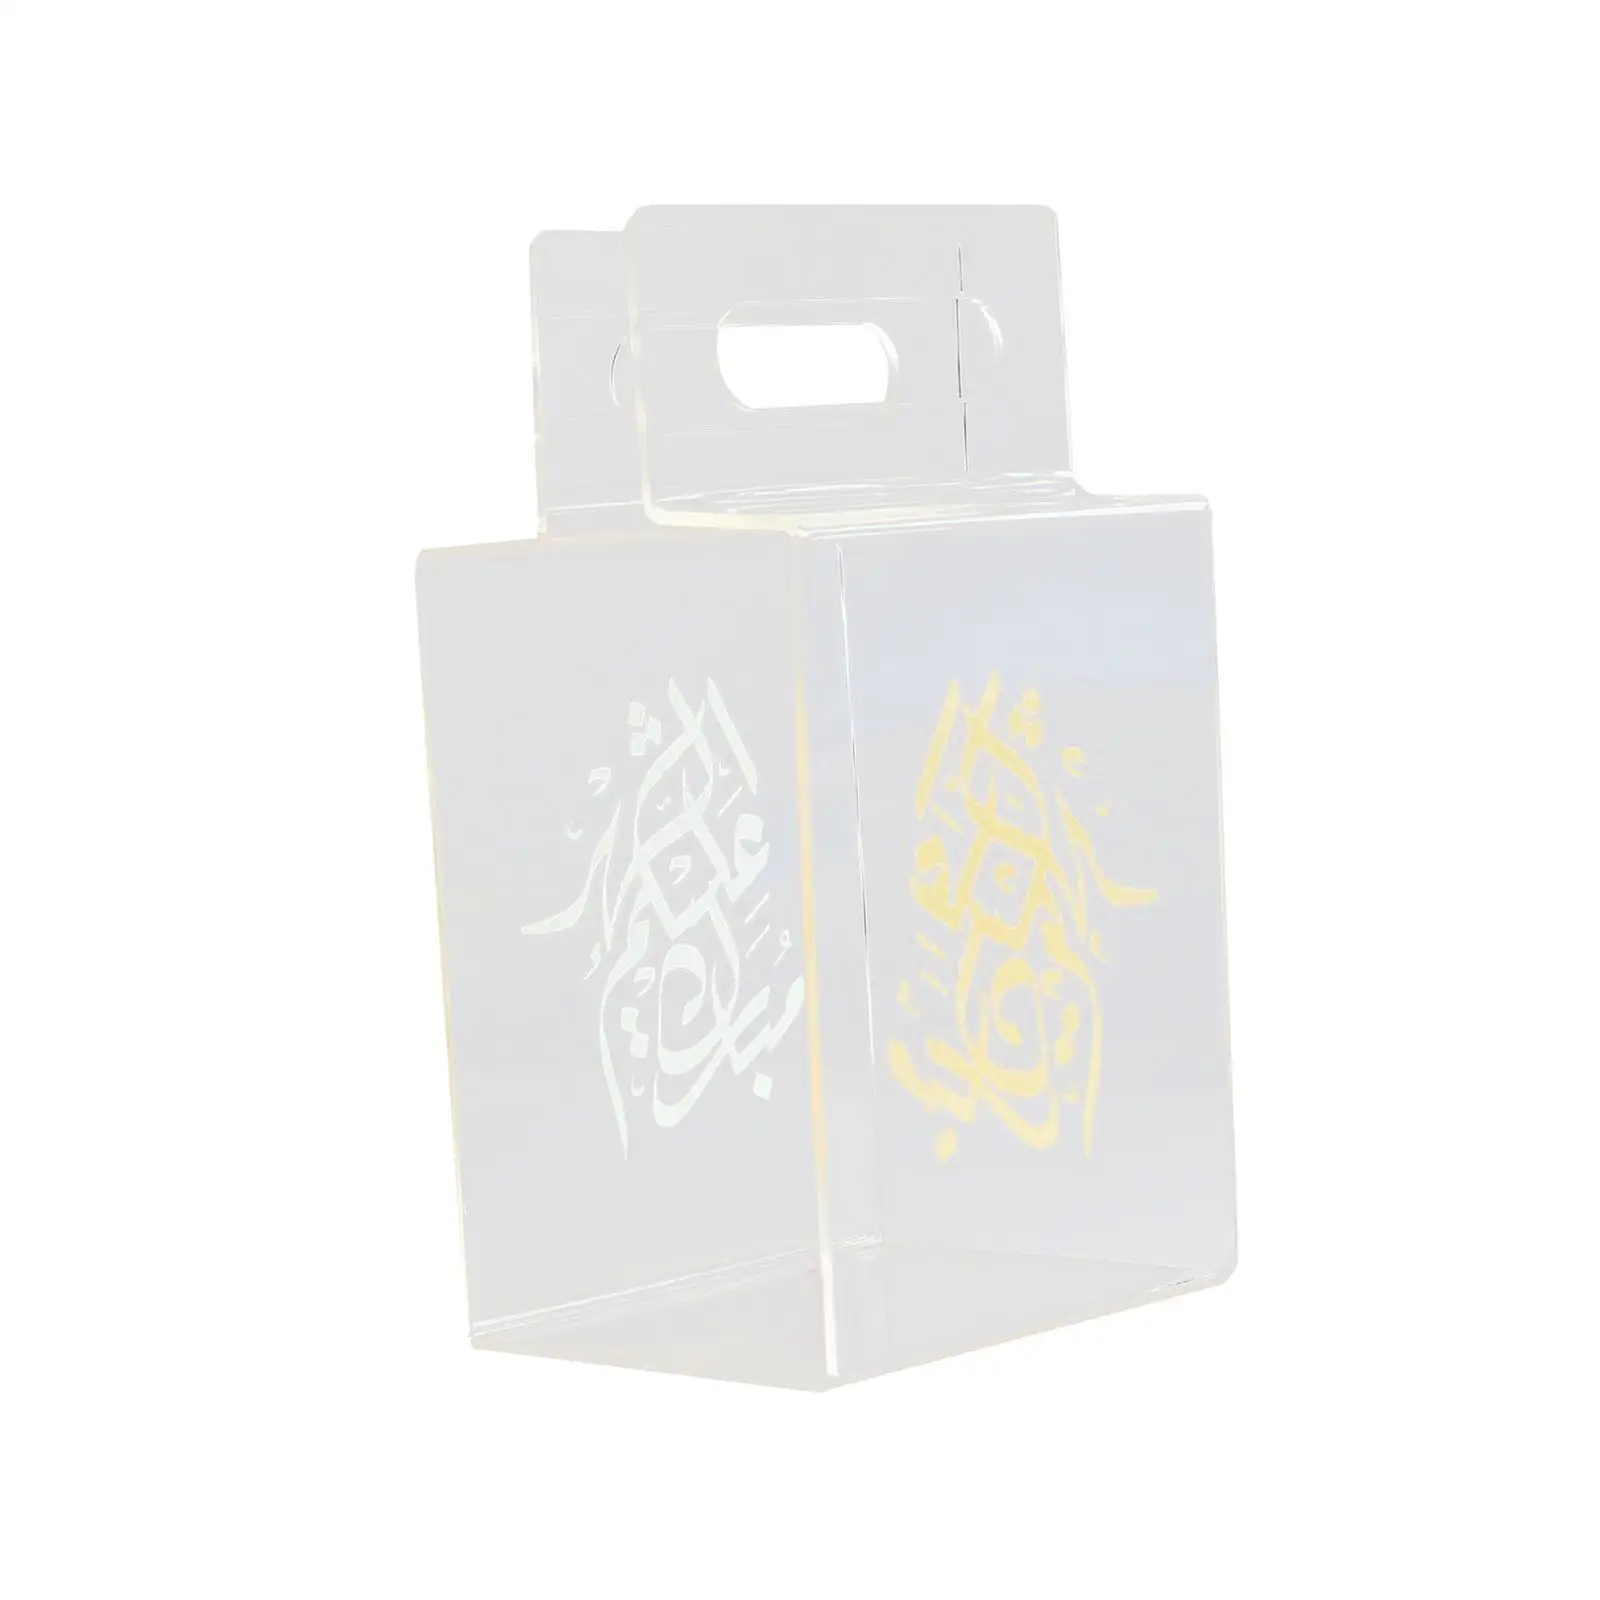 Wedding Favour Boxes Candy Treat Gift Box Snack Boxes Clear Gift Boxes for Gift Box Weddings Birthdays Holiday Parties